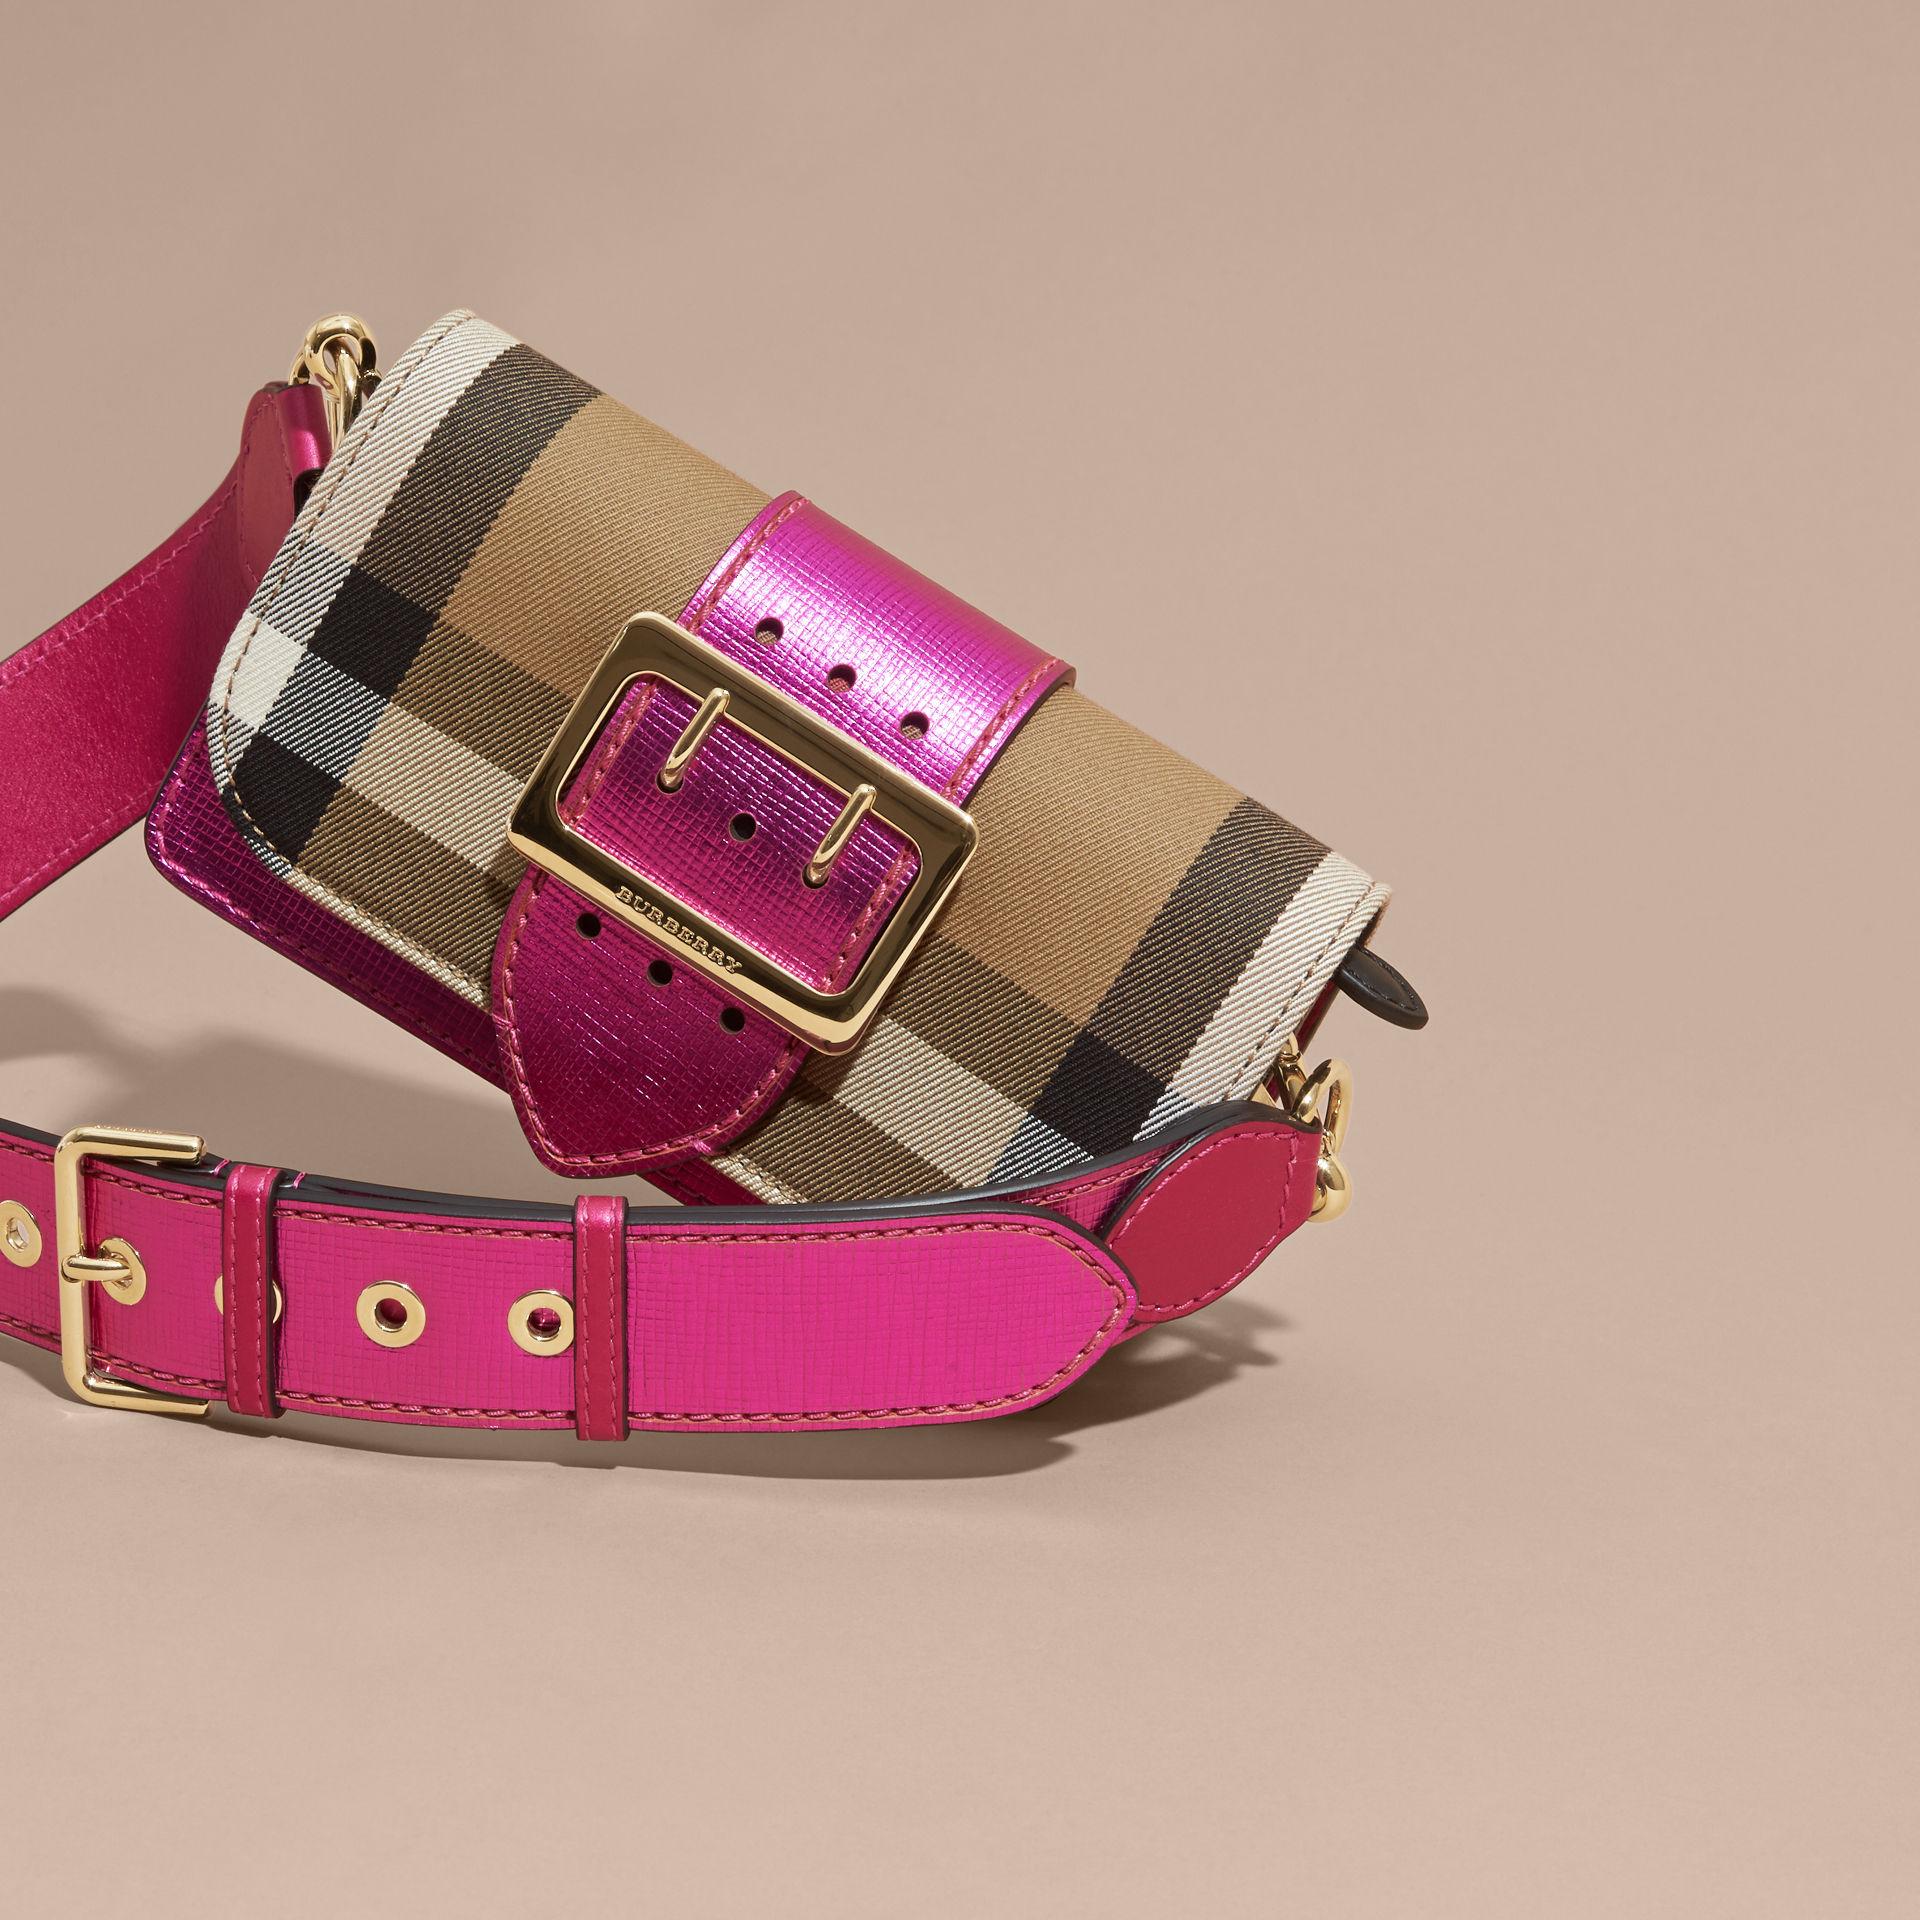 Burberry Belt Bag Pink | Confederated Tribes of the Umatilla Indian Reservation